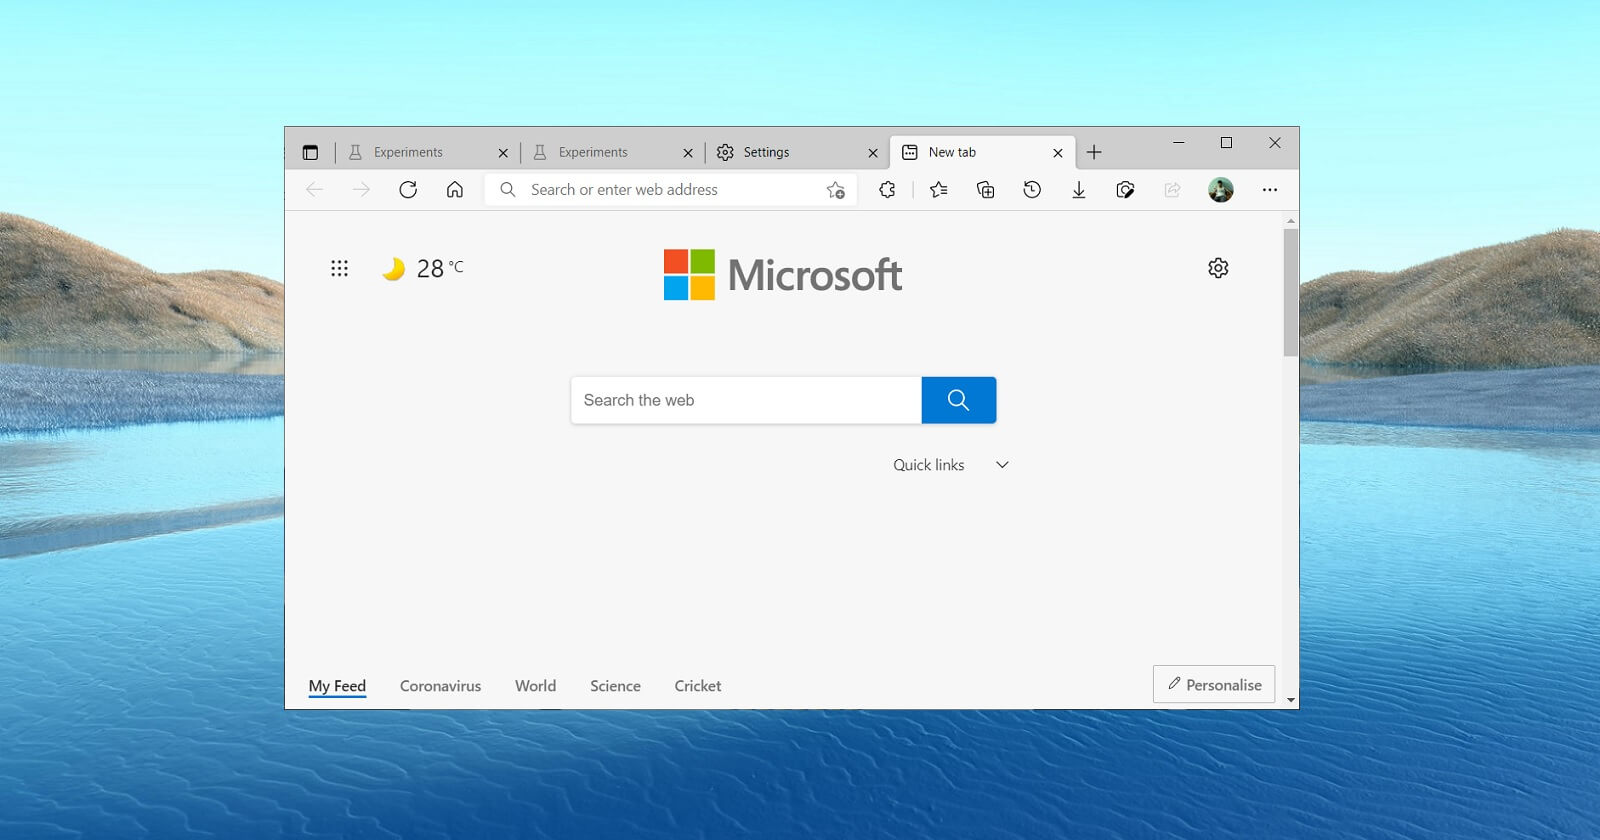 Microsoft Edge: The default browser for Windows 10 that offers a seamless browsing experience.
Safari: Apple's default browser for macOS and iOS devices, known for its sleek design and performance.